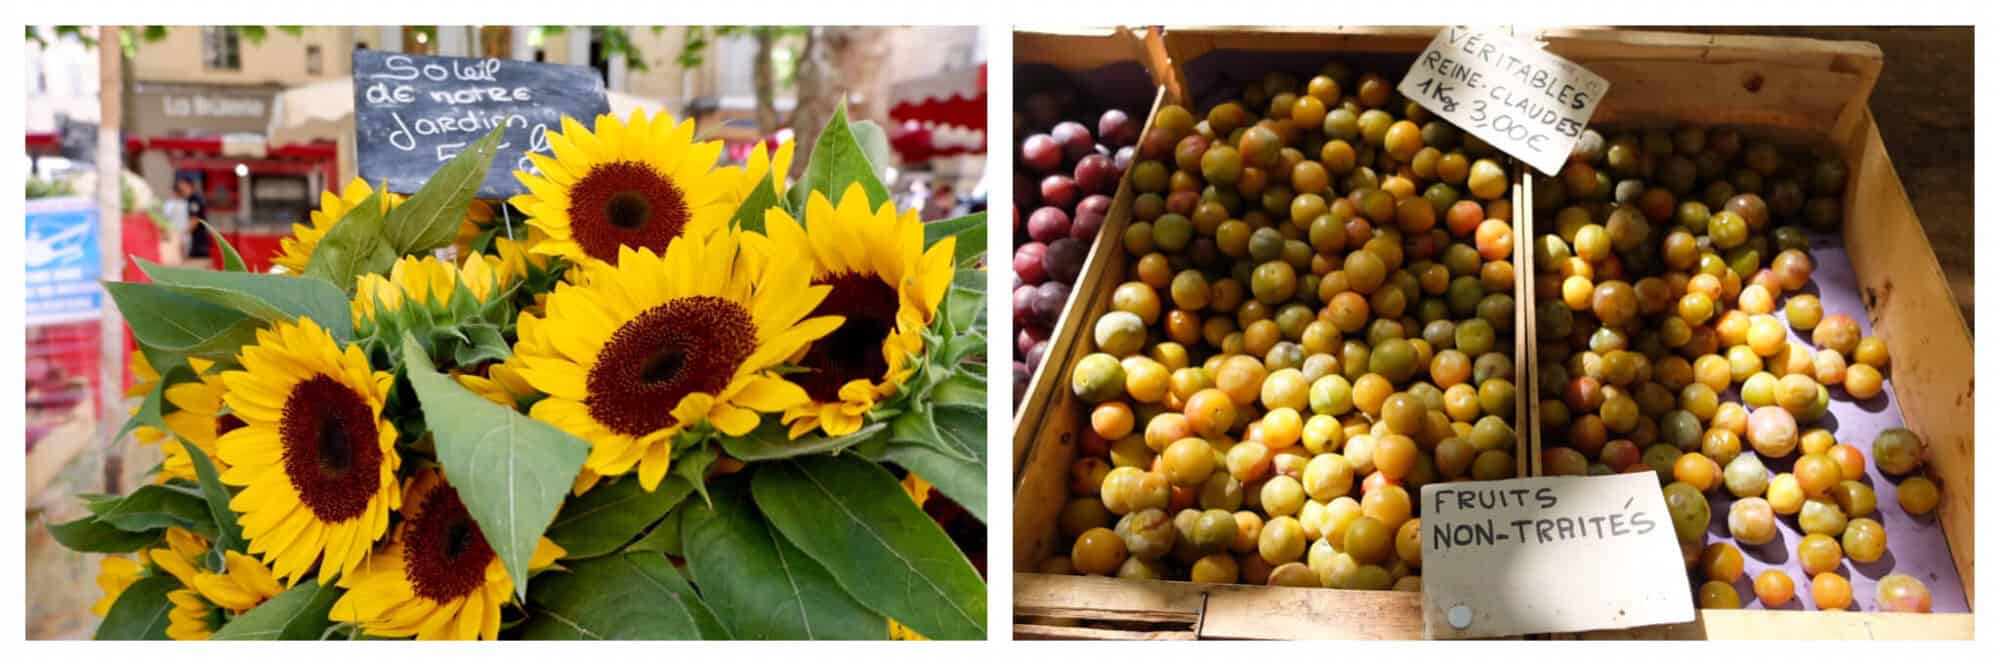 Left: sunflowers at a market in Provence. Right: reine-claude plums at a Provence market. 